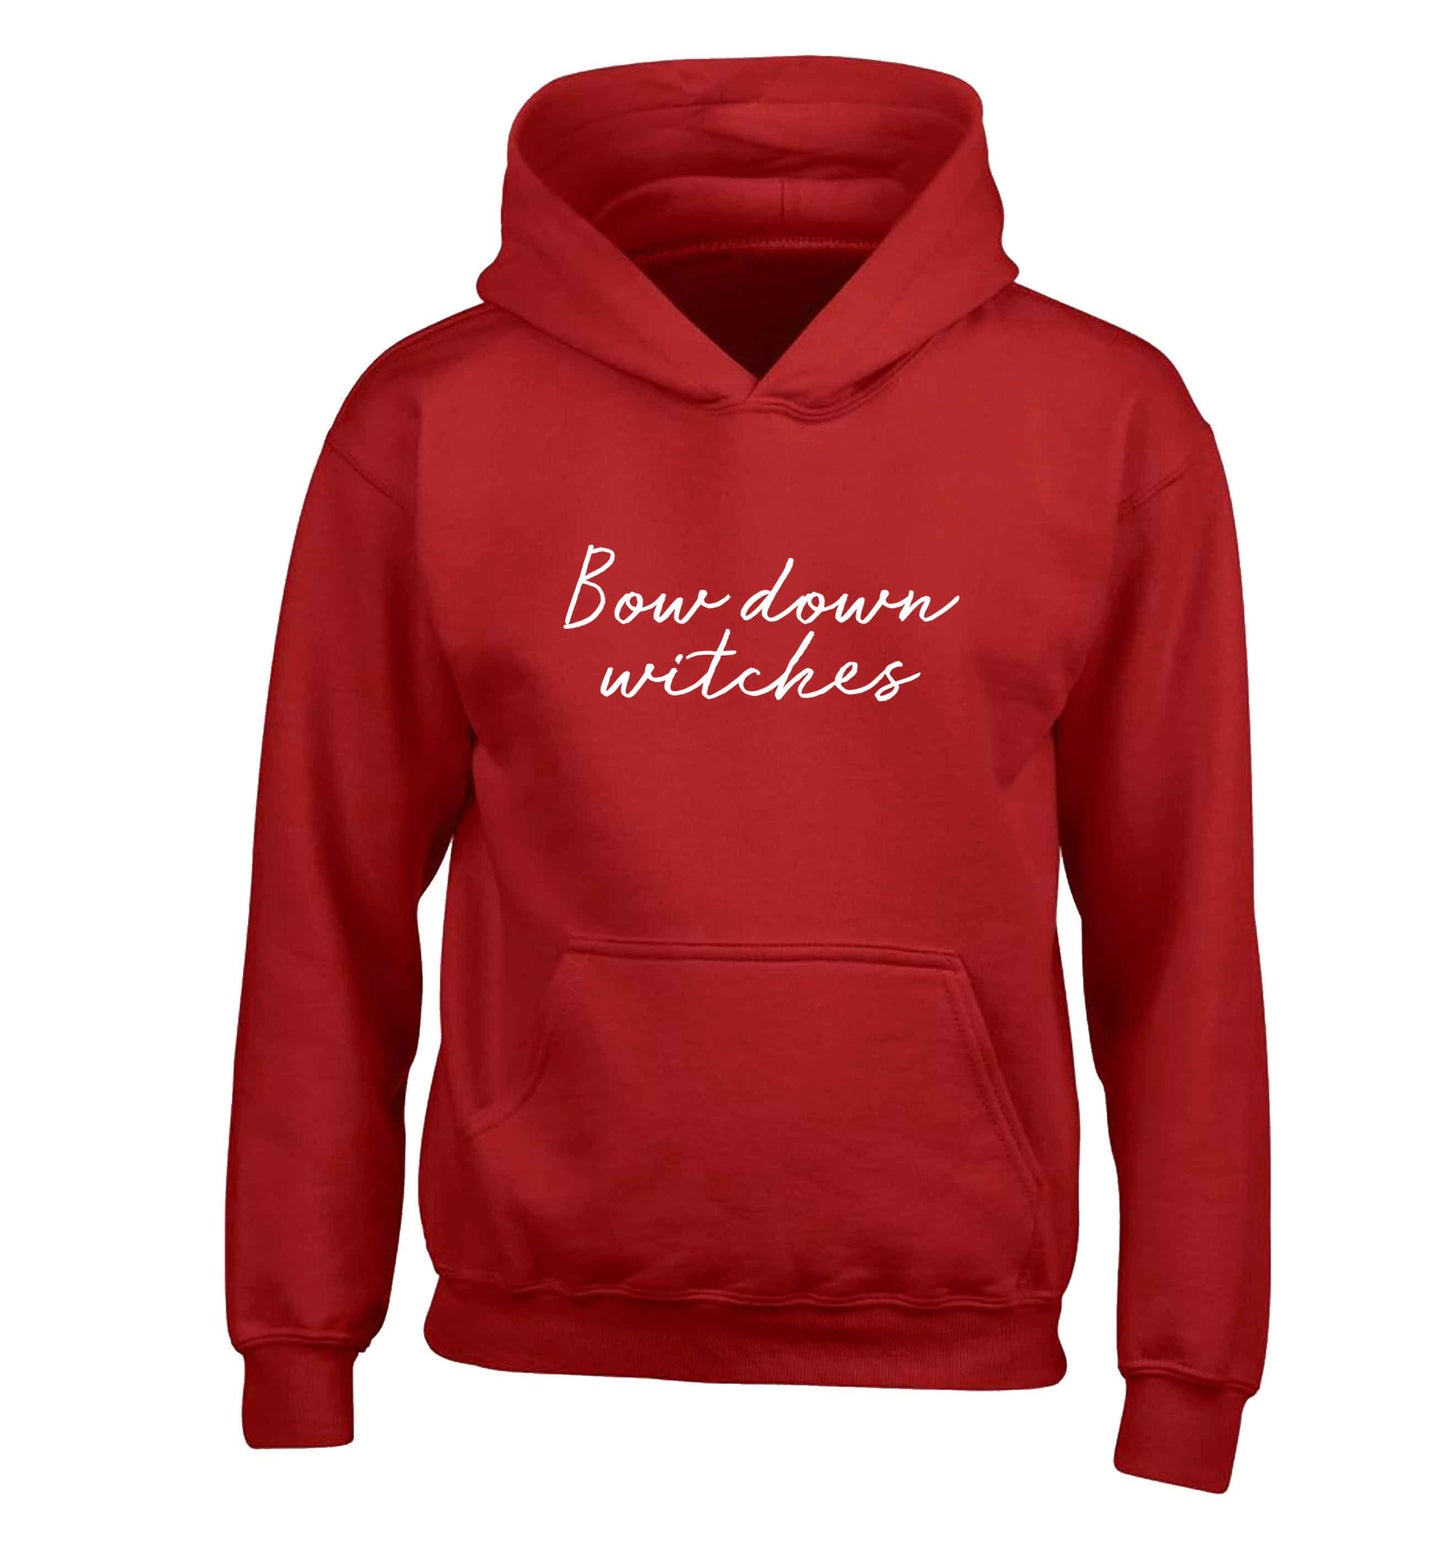 Bow down witches children's red hoodie 12-13 Years